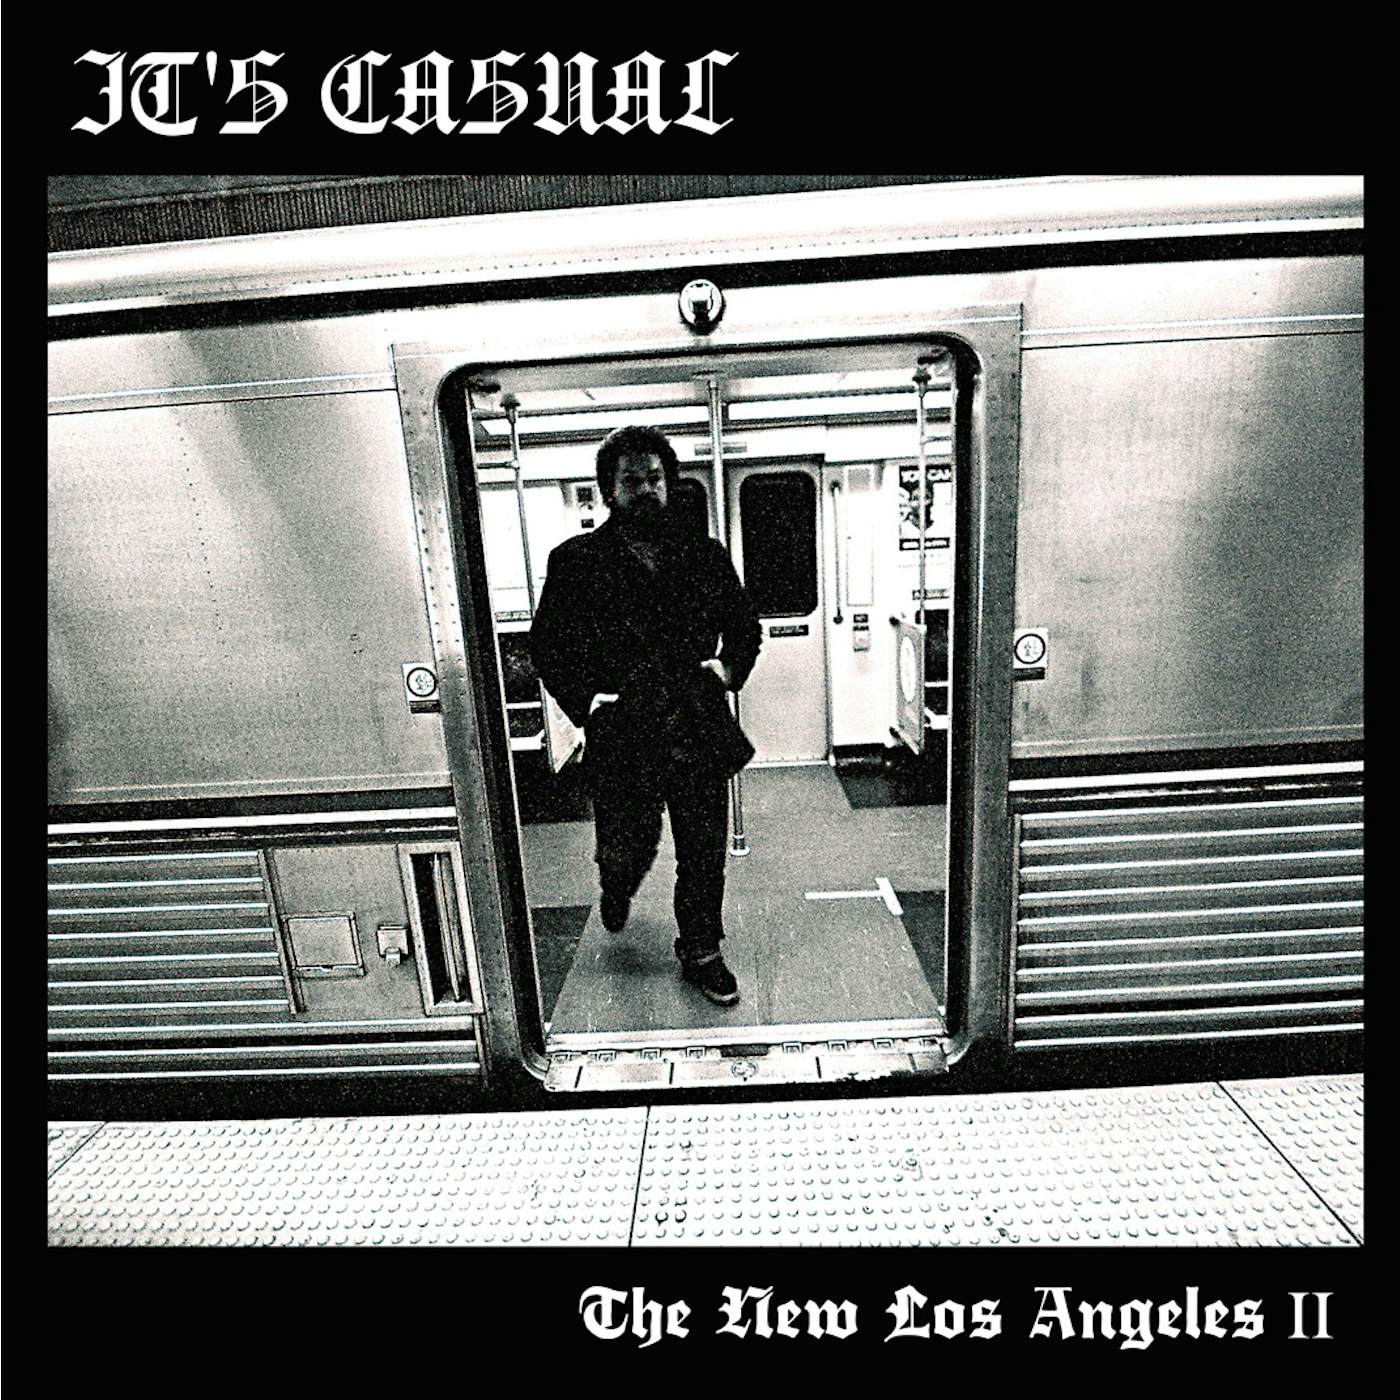 It's Casual NEW LOS ANGELES II: LESS VIOLENCE MORE VIOLINS Vinyl Record